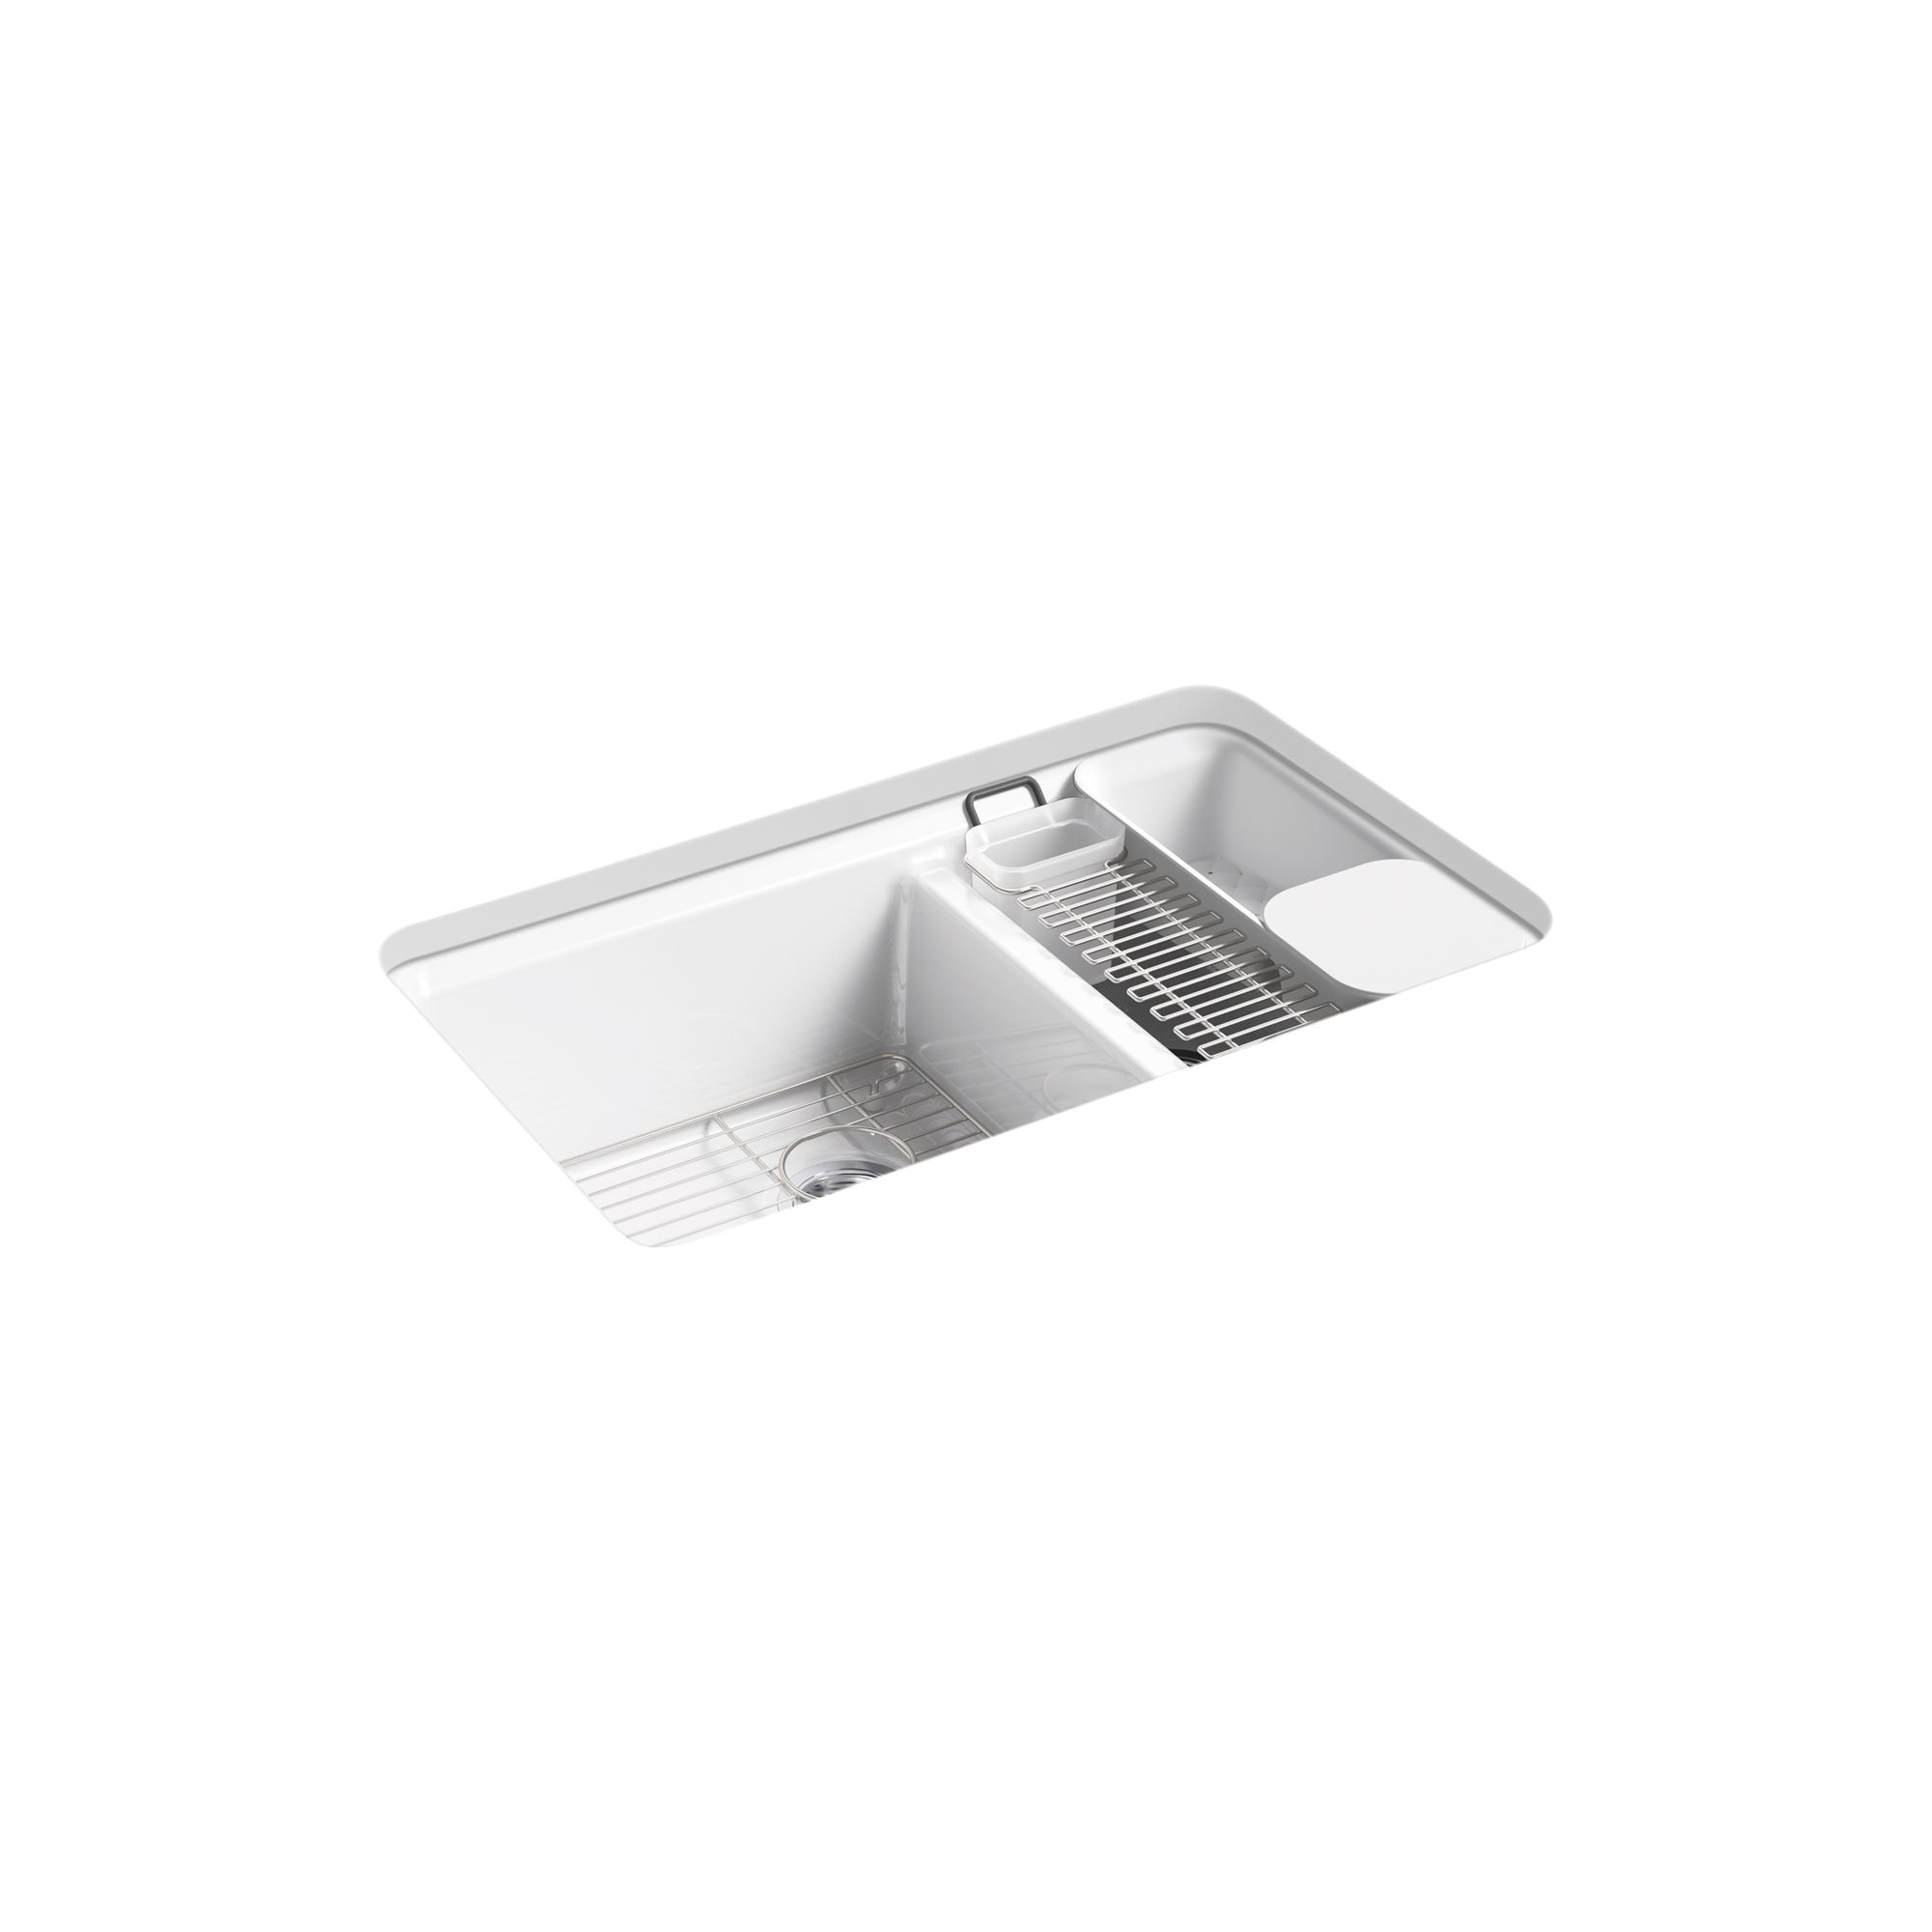 https://ak1.ostkcdn.com/images/products/is/images/direct/74f0daa221b22b2d6807008bc6ce73b0351af810/Kohler-Riverby%C2%AE-Undermount-Large-Medium-Double-Bowl-Kitchen-Sink-With-Accessories-And-5-Faucet-Holes-White-%28K-8669-5UA3-0%29.jpg